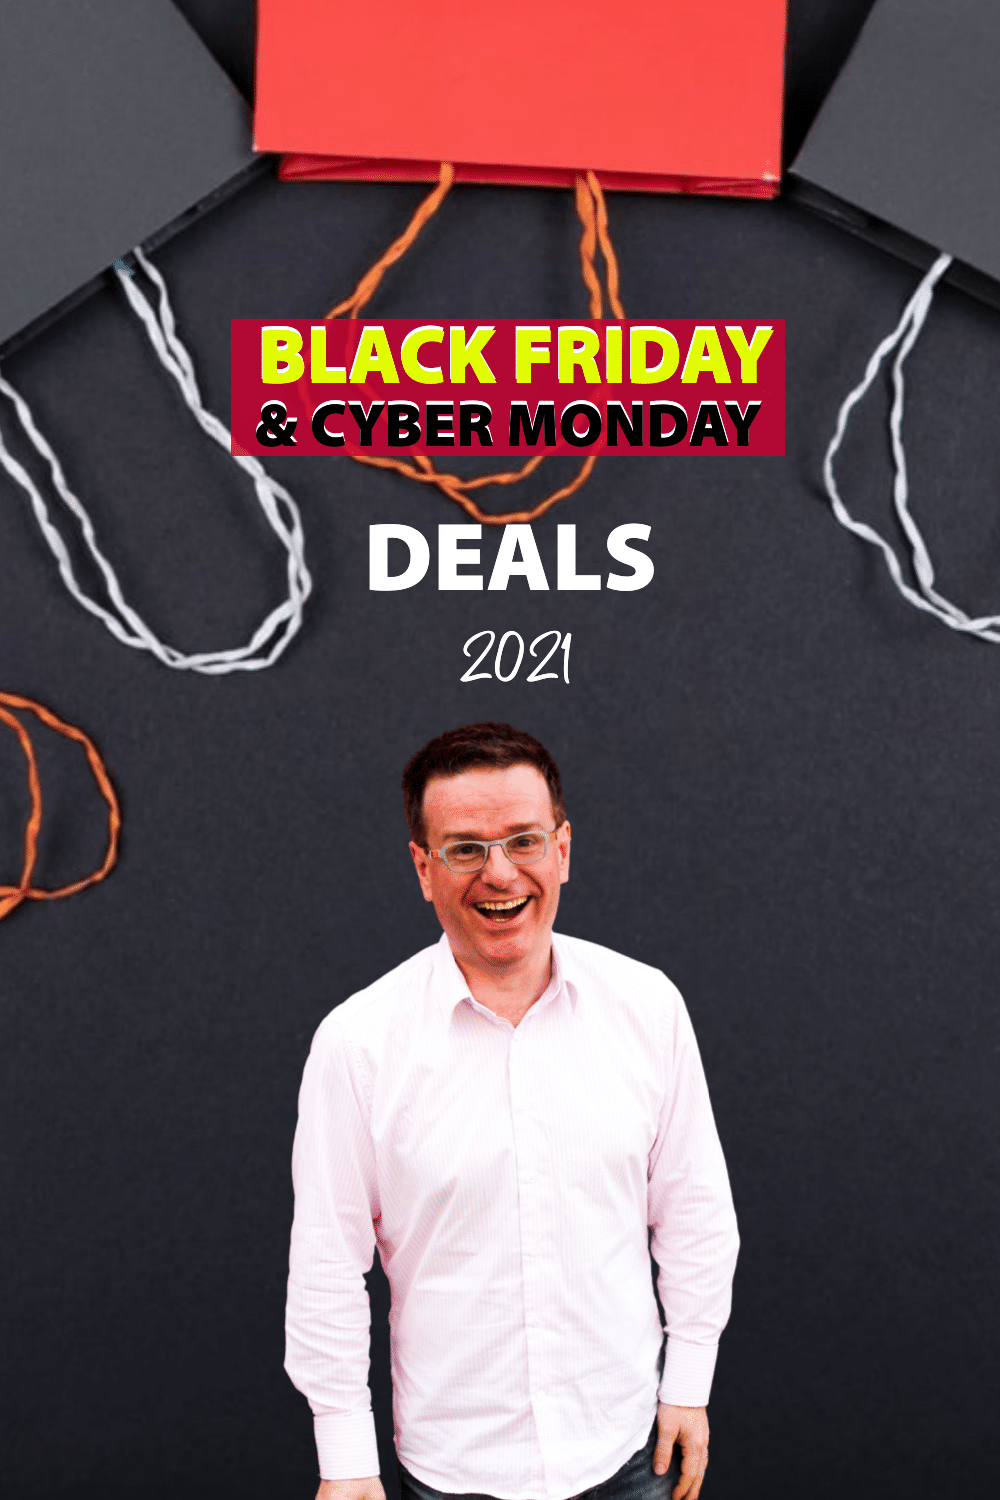 Top Black Friday & Cyber Monday Deals for Marketers 2021